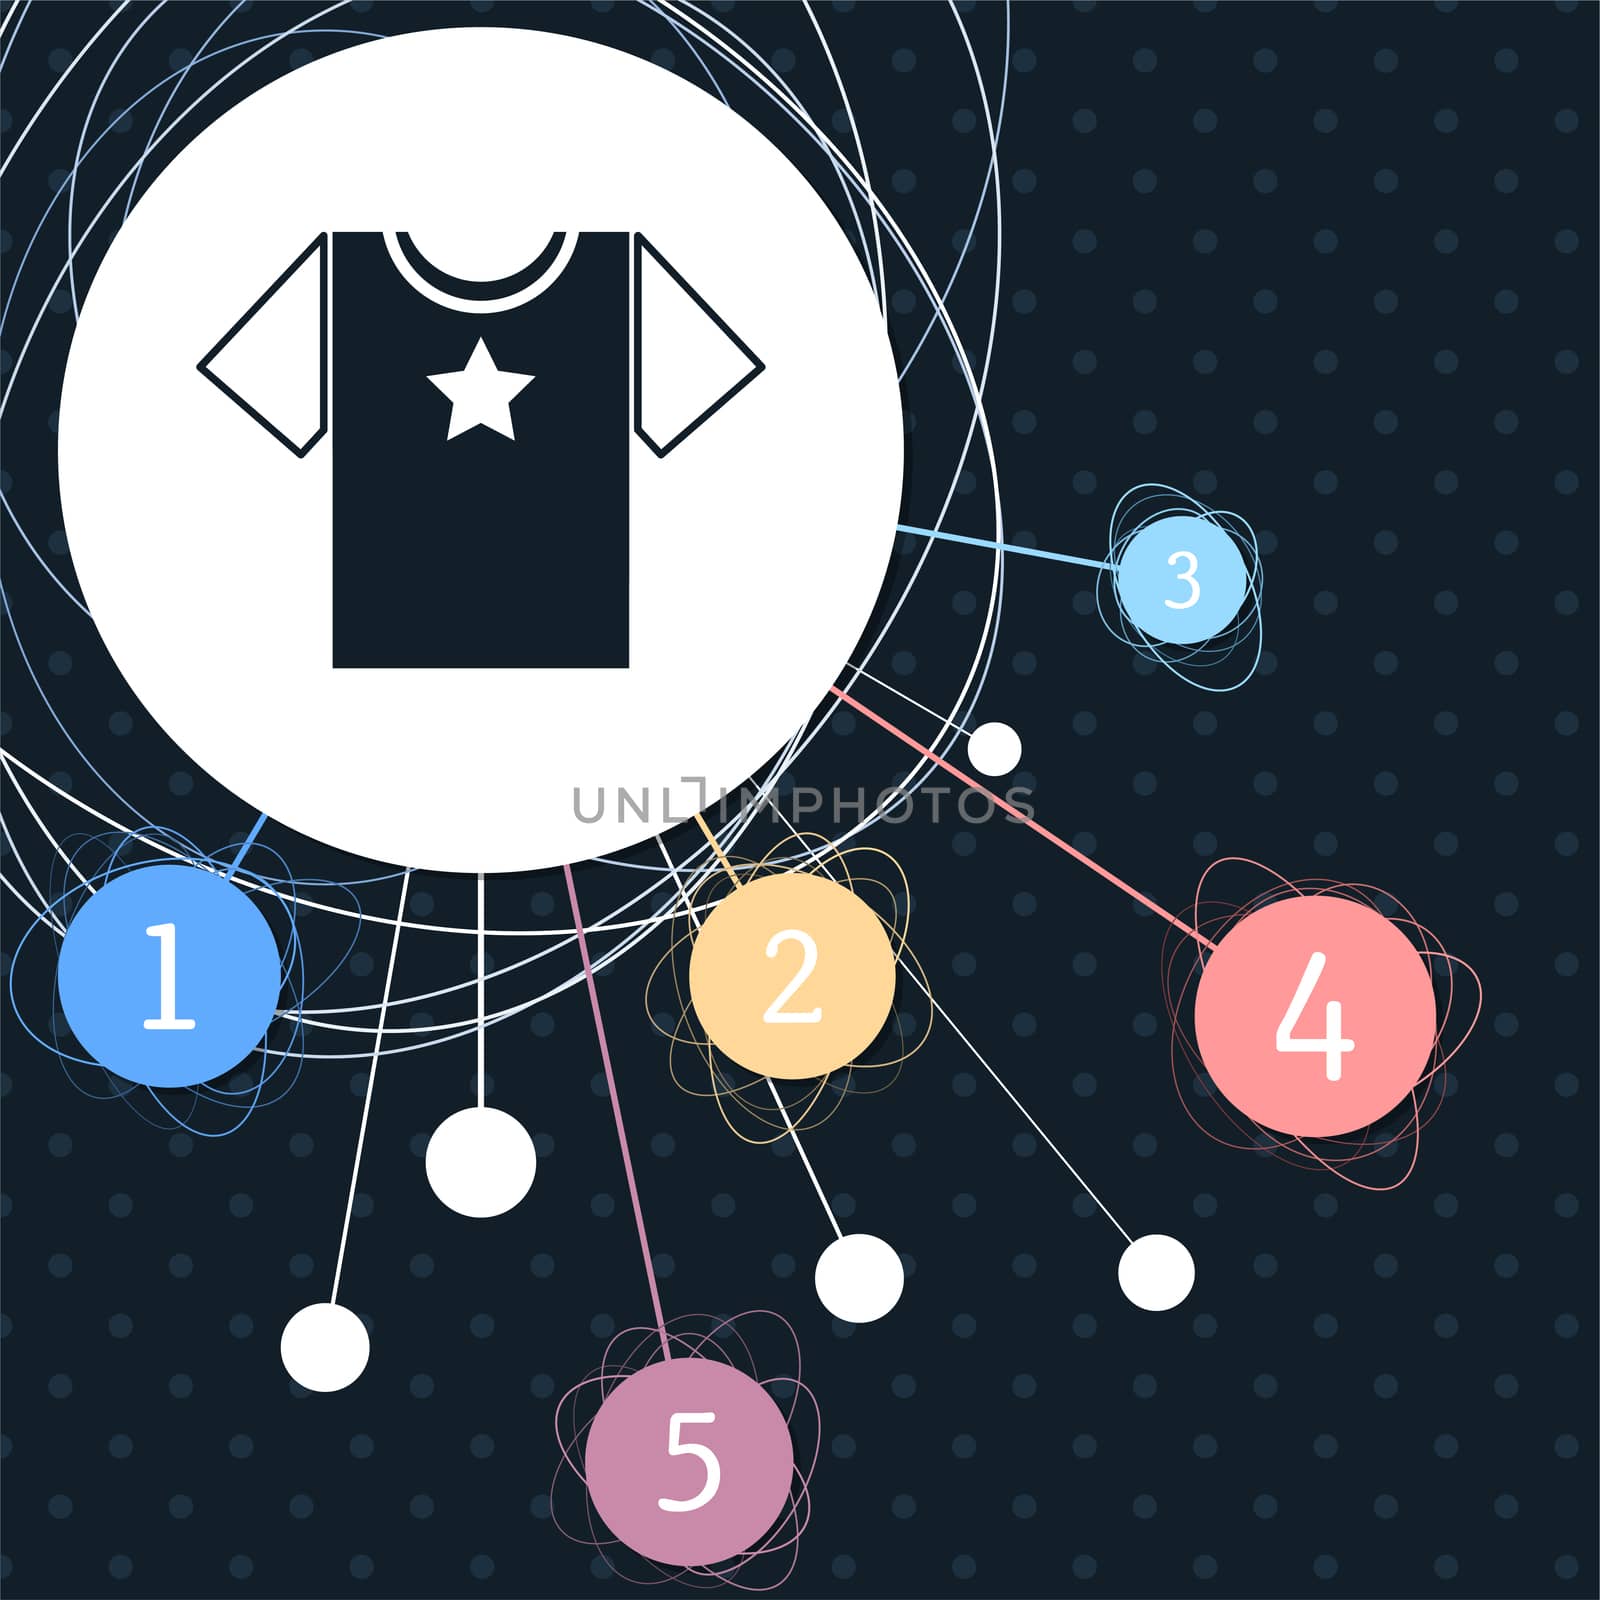 t-shirt icon with the background to the point and infographic style.  by Adamchuk